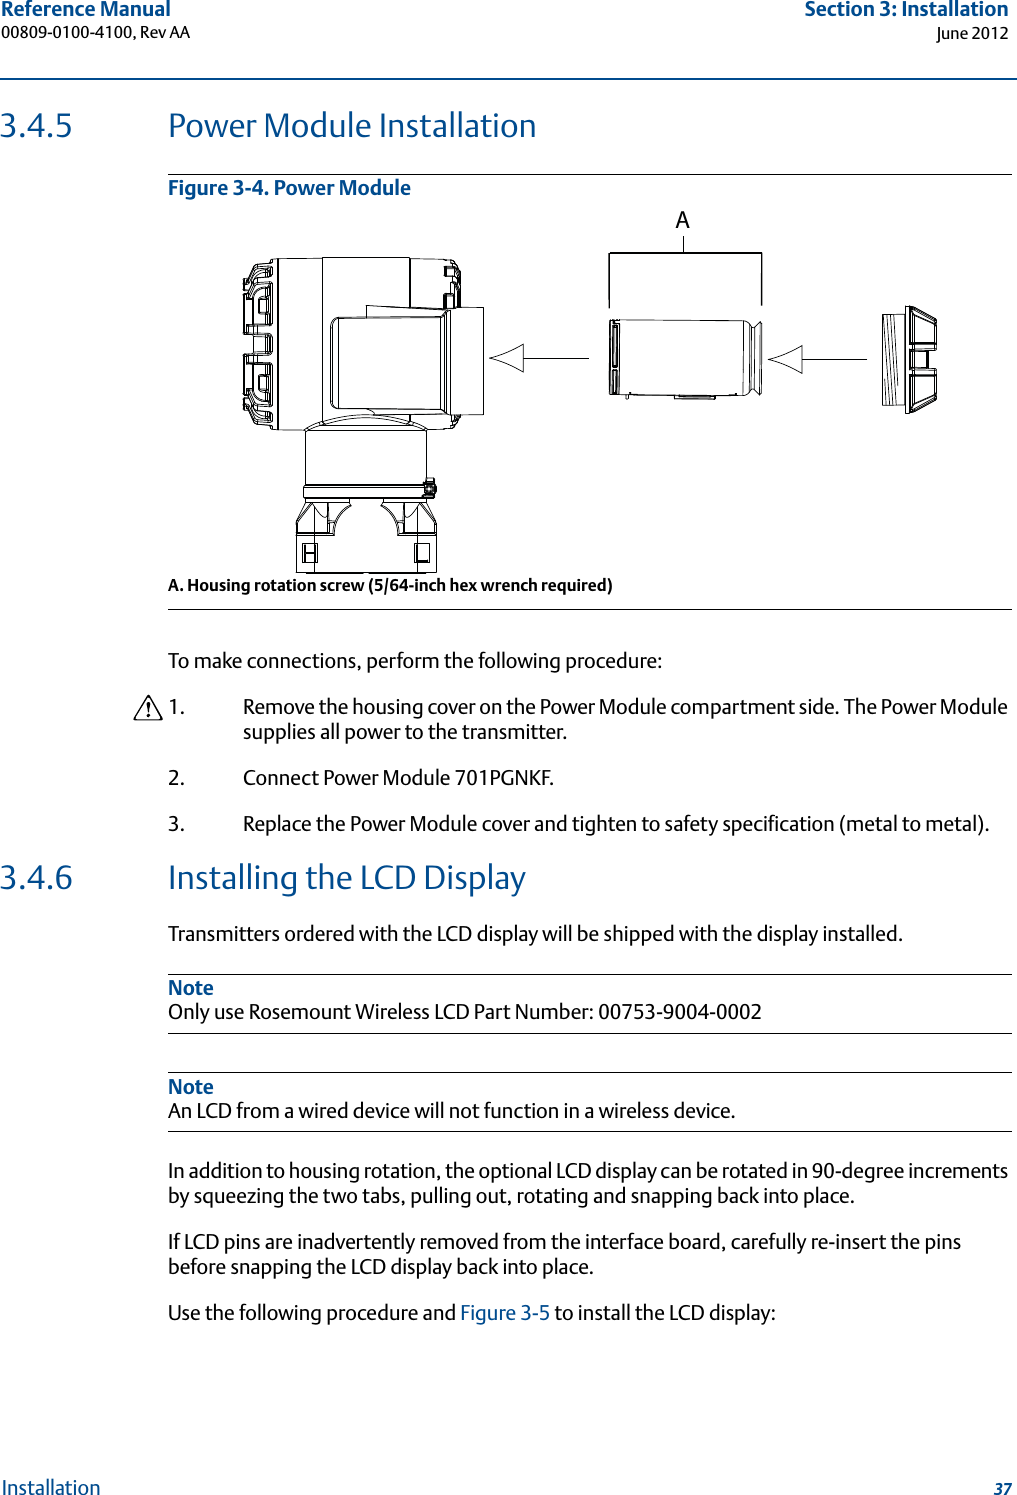 37Reference Manual 00809-0100-4100, Rev AASection 3: InstallationJune 2012Installation3.4.5 Power Module InstallationFigure 3-4. Power Module A. Housing rotation screw (5/64-inch hex wrench required)To make connections, perform the following procedure:1. Remove the housing cover on the Power Module compartment side. The Power Module supplies all power to the transmitter. 2. Connect Power Module 701PGNKF.3. Replace the Power Module cover and tighten to safety specification (metal to metal).3.4.6 Installing the LCD DisplayTransmitters ordered with the LCD display will be shipped with the display installed.NoteOnly use Rosemount Wireless LCD Part Number: 00753-9004-0002NoteAn LCD from a wired device will not function in a wireless device.In addition to housing rotation, the optional LCD display can be rotated in 90-degree increments by squeezing the two tabs, pulling out, rotating and snapping back into place.If LCD pins are inadvertently removed from the interface board, carefully re-insert the pins before snapping the LCD display back into place.Use the following procedure and Figure 3-5 to install the LCD display:A